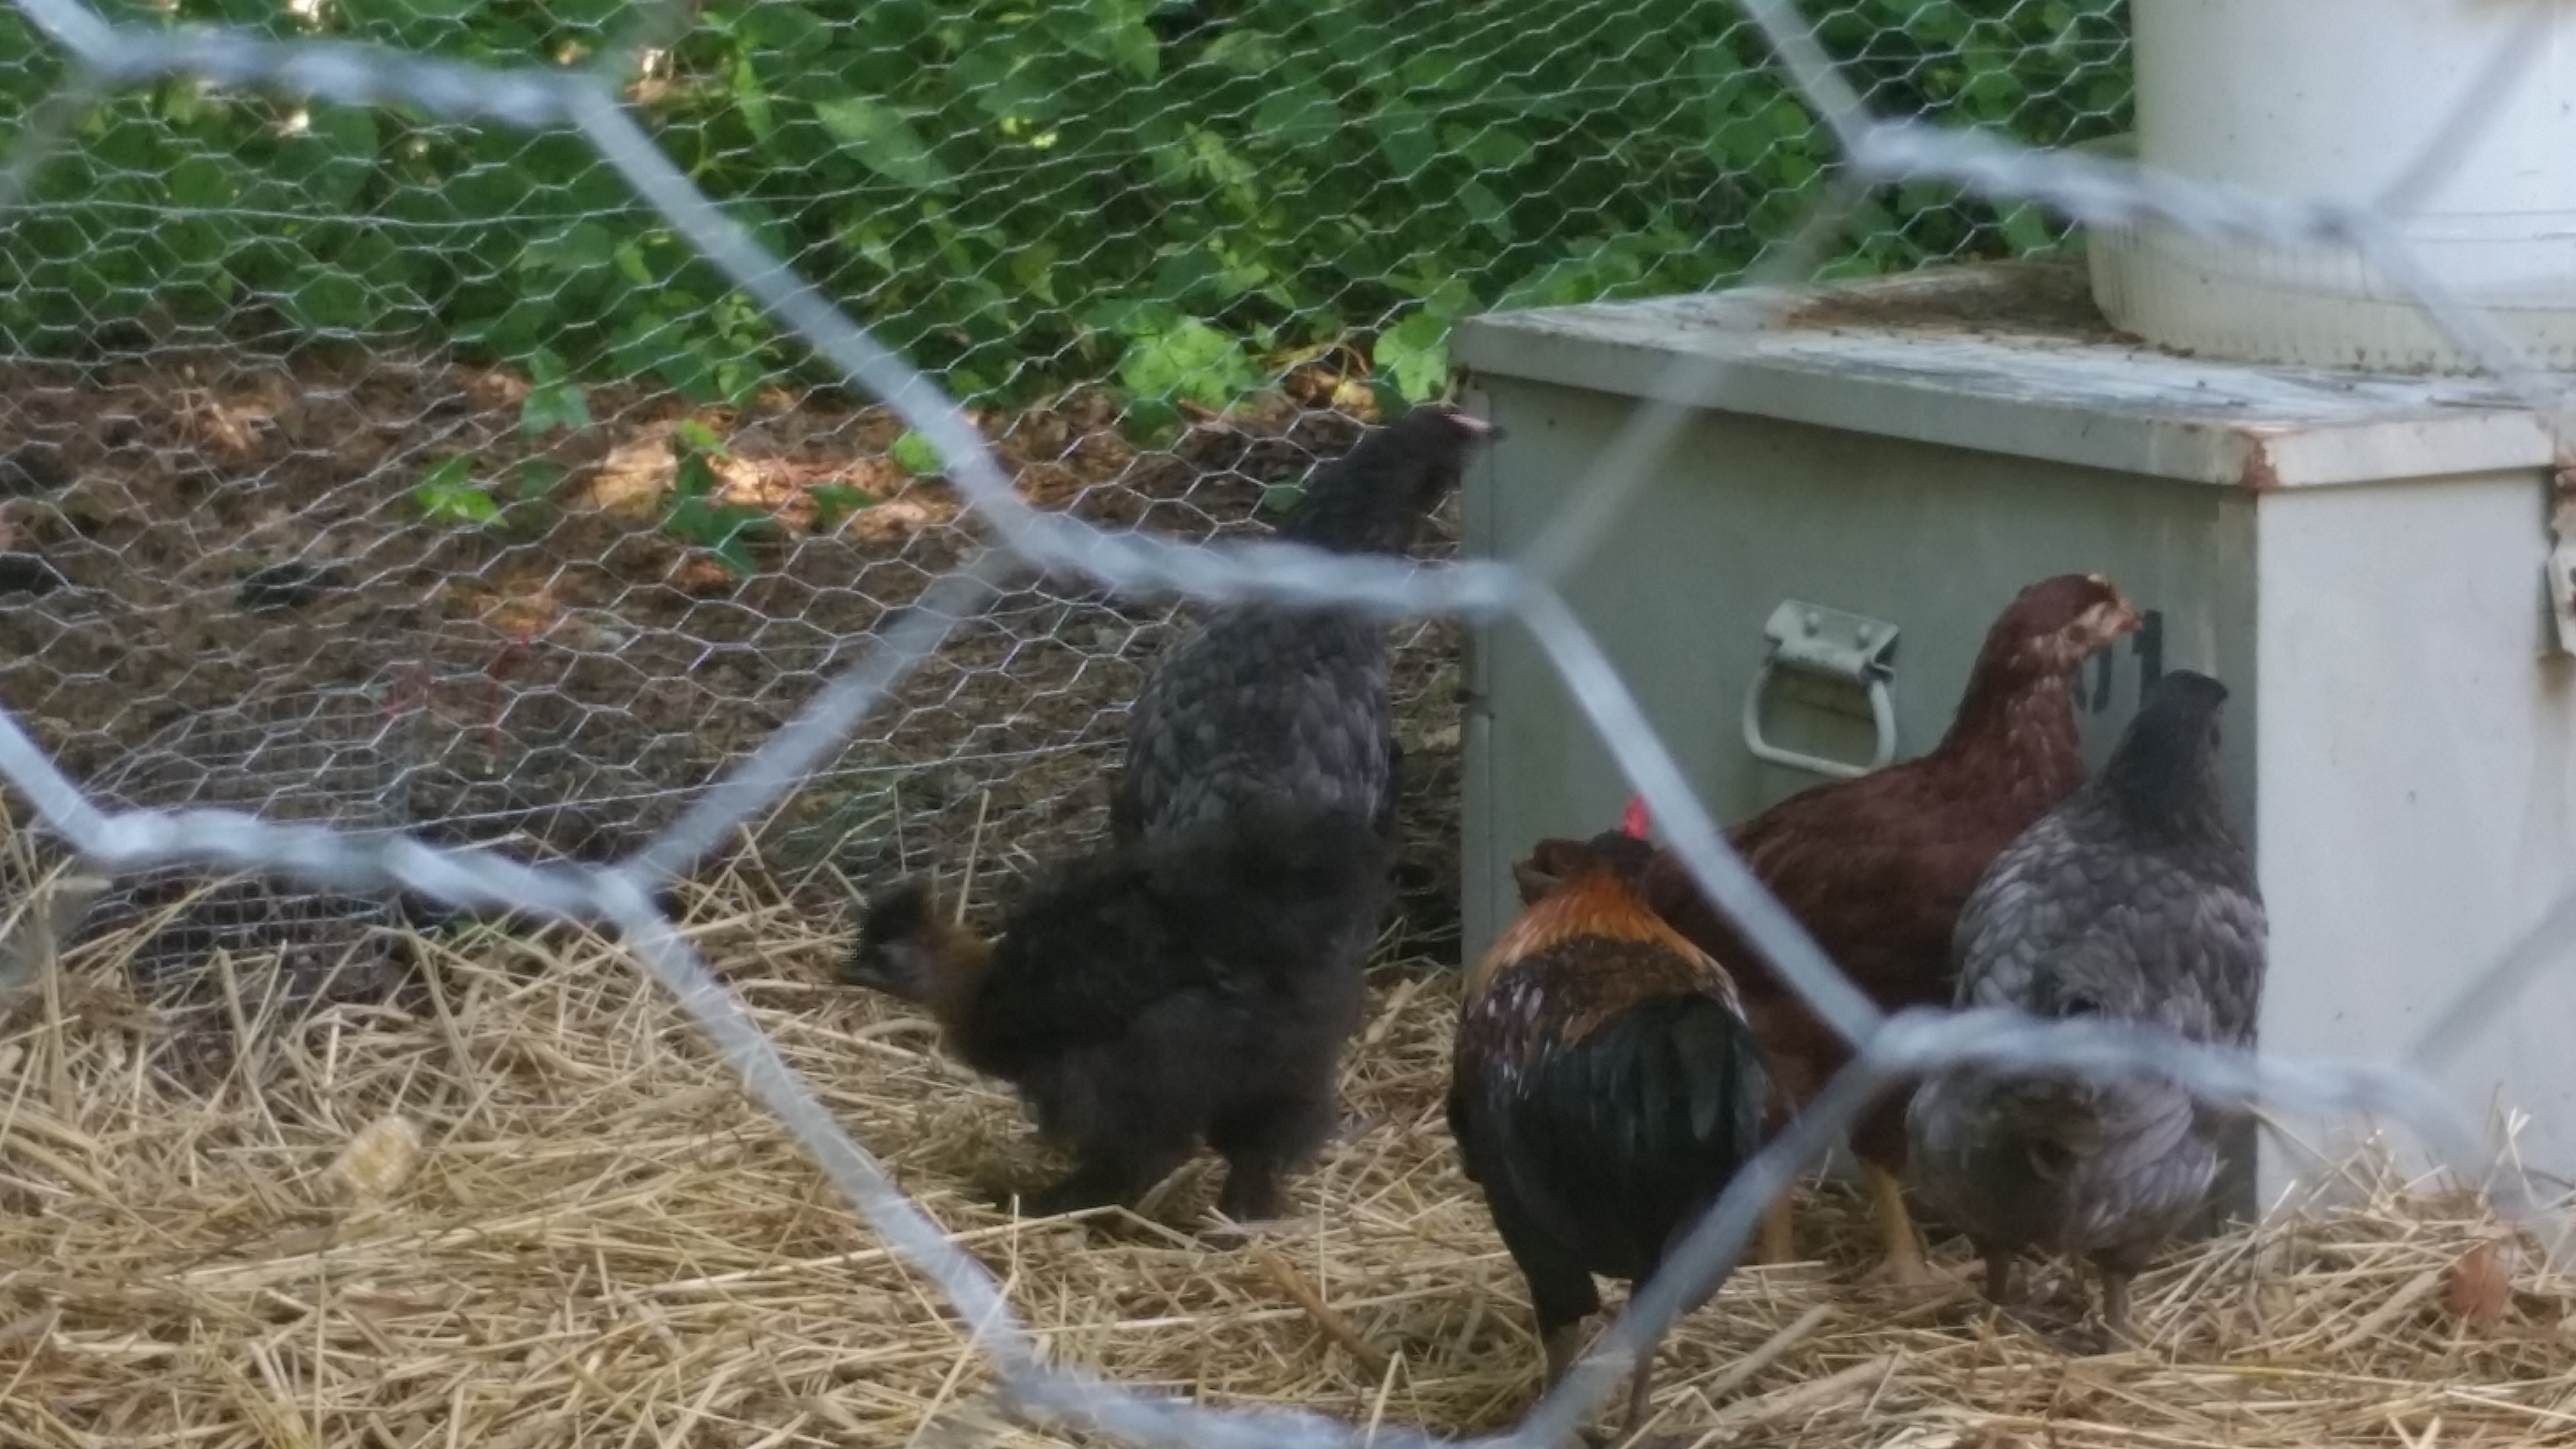 Silkie, 3 Cochin/Rhode Island red crosses, and a Bantam roo